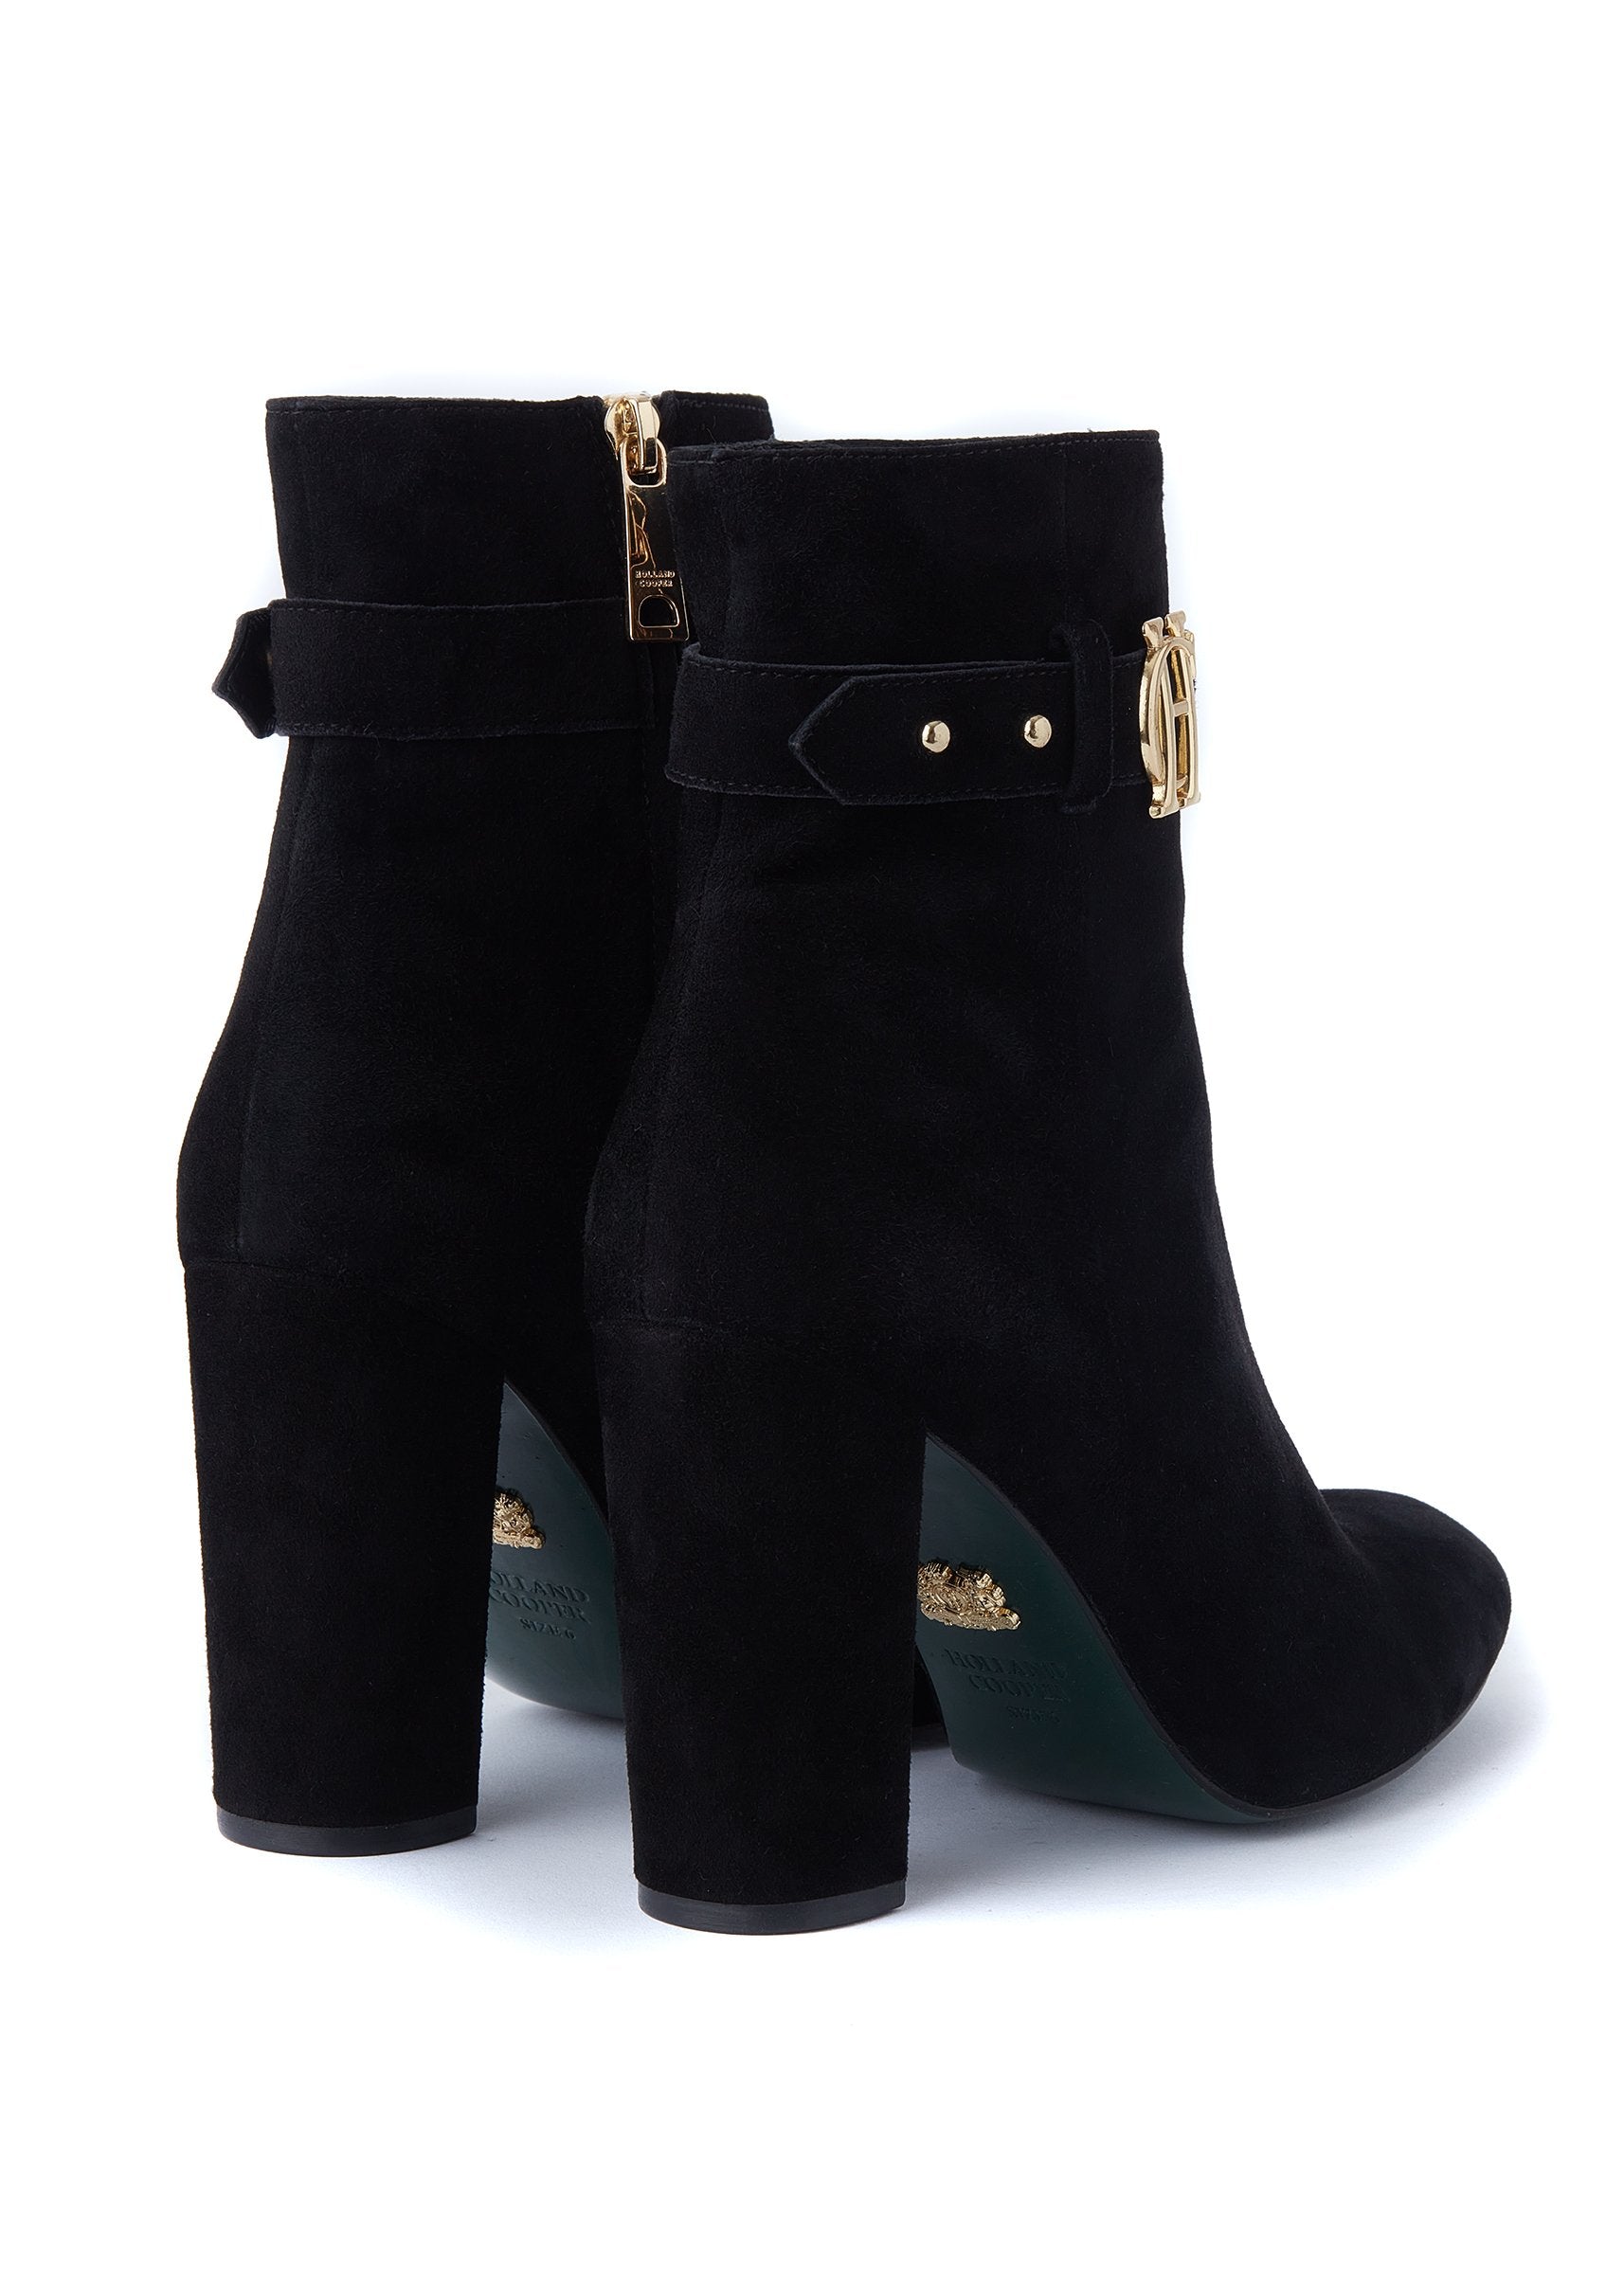 Mayfair Suede Ankle Boot - Black